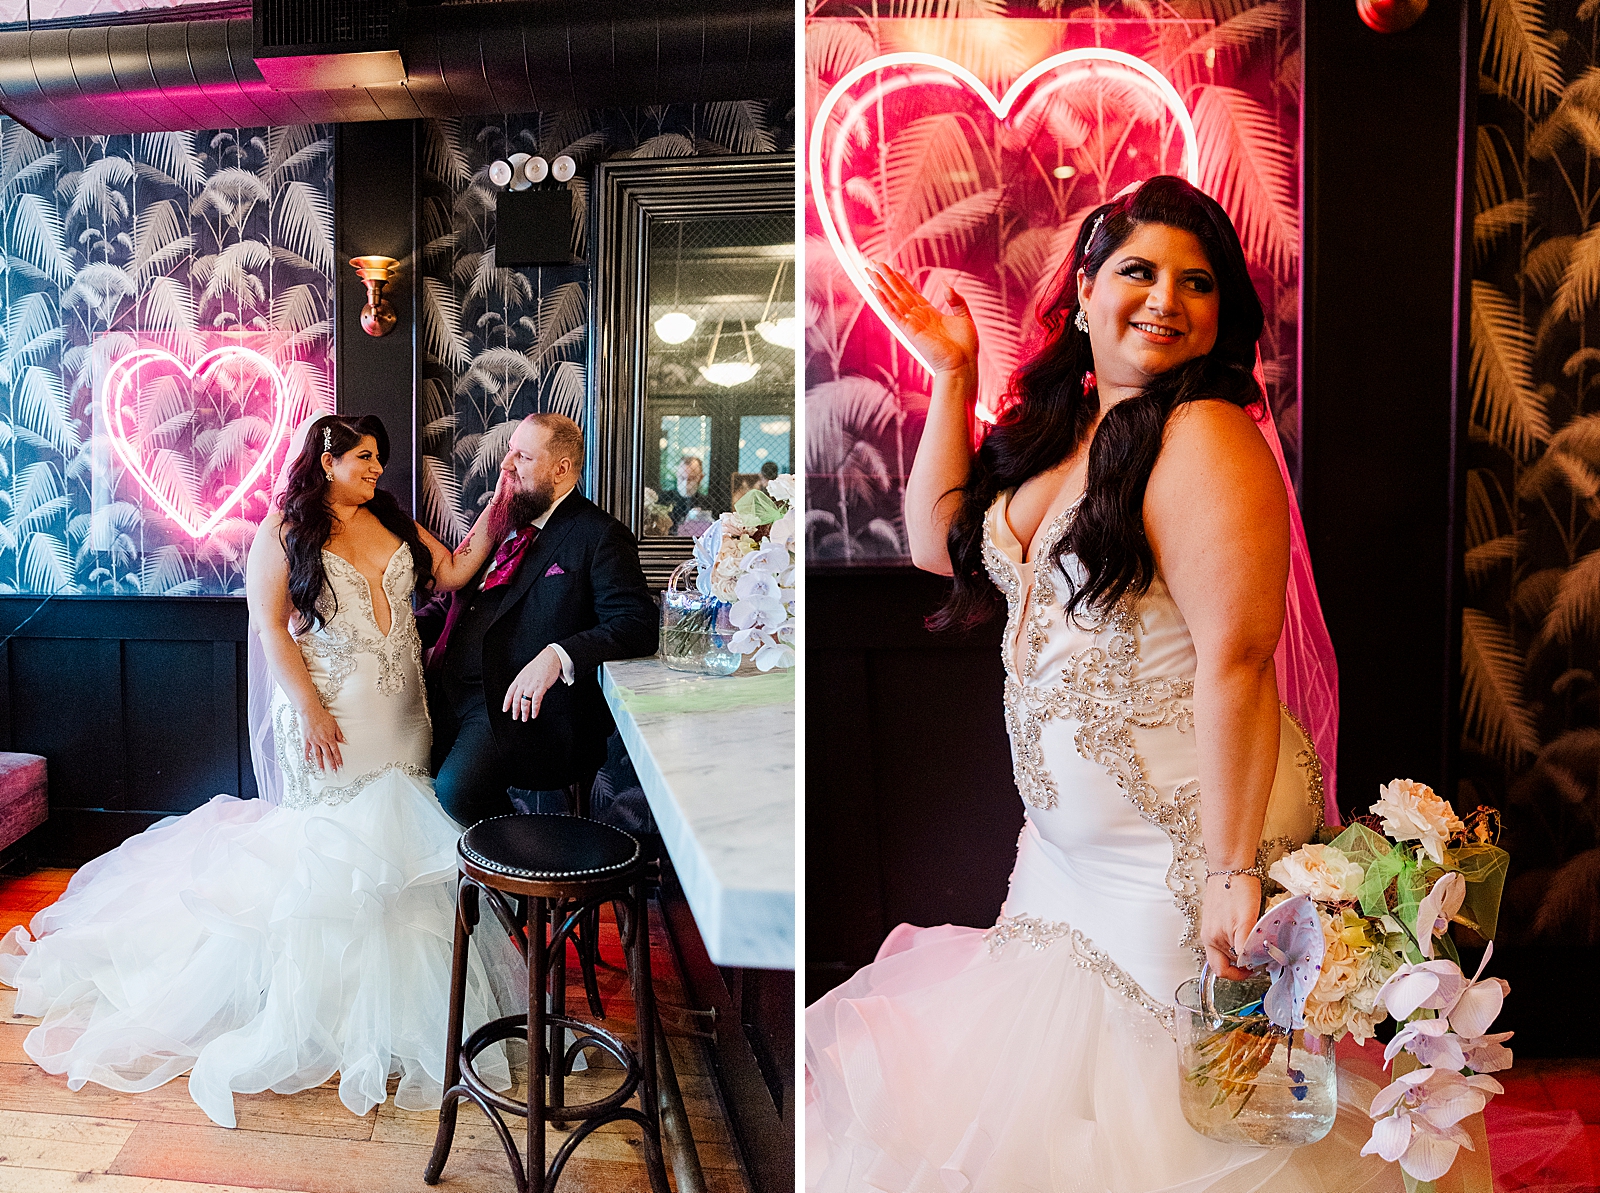 Left photo: Full body shot of the bride and groom smiling at each other as they stand in front of a pink florescent light heart sign.
Right photo: Upper body shot of the bride posing in front of a pink florescent light heart sign.